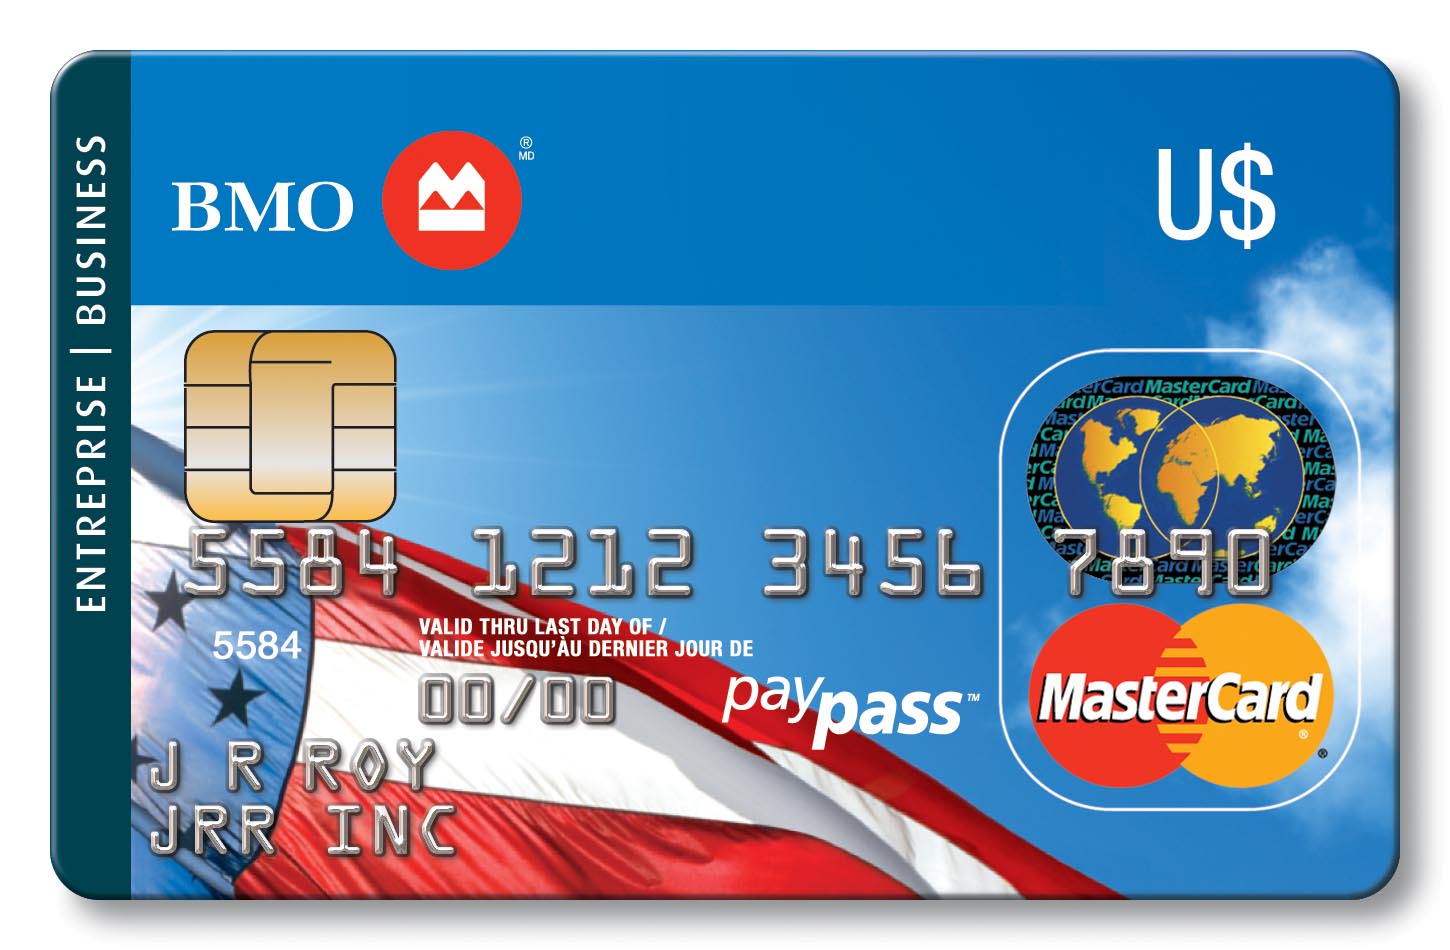 How do you sign up for a MasterCard credit card?